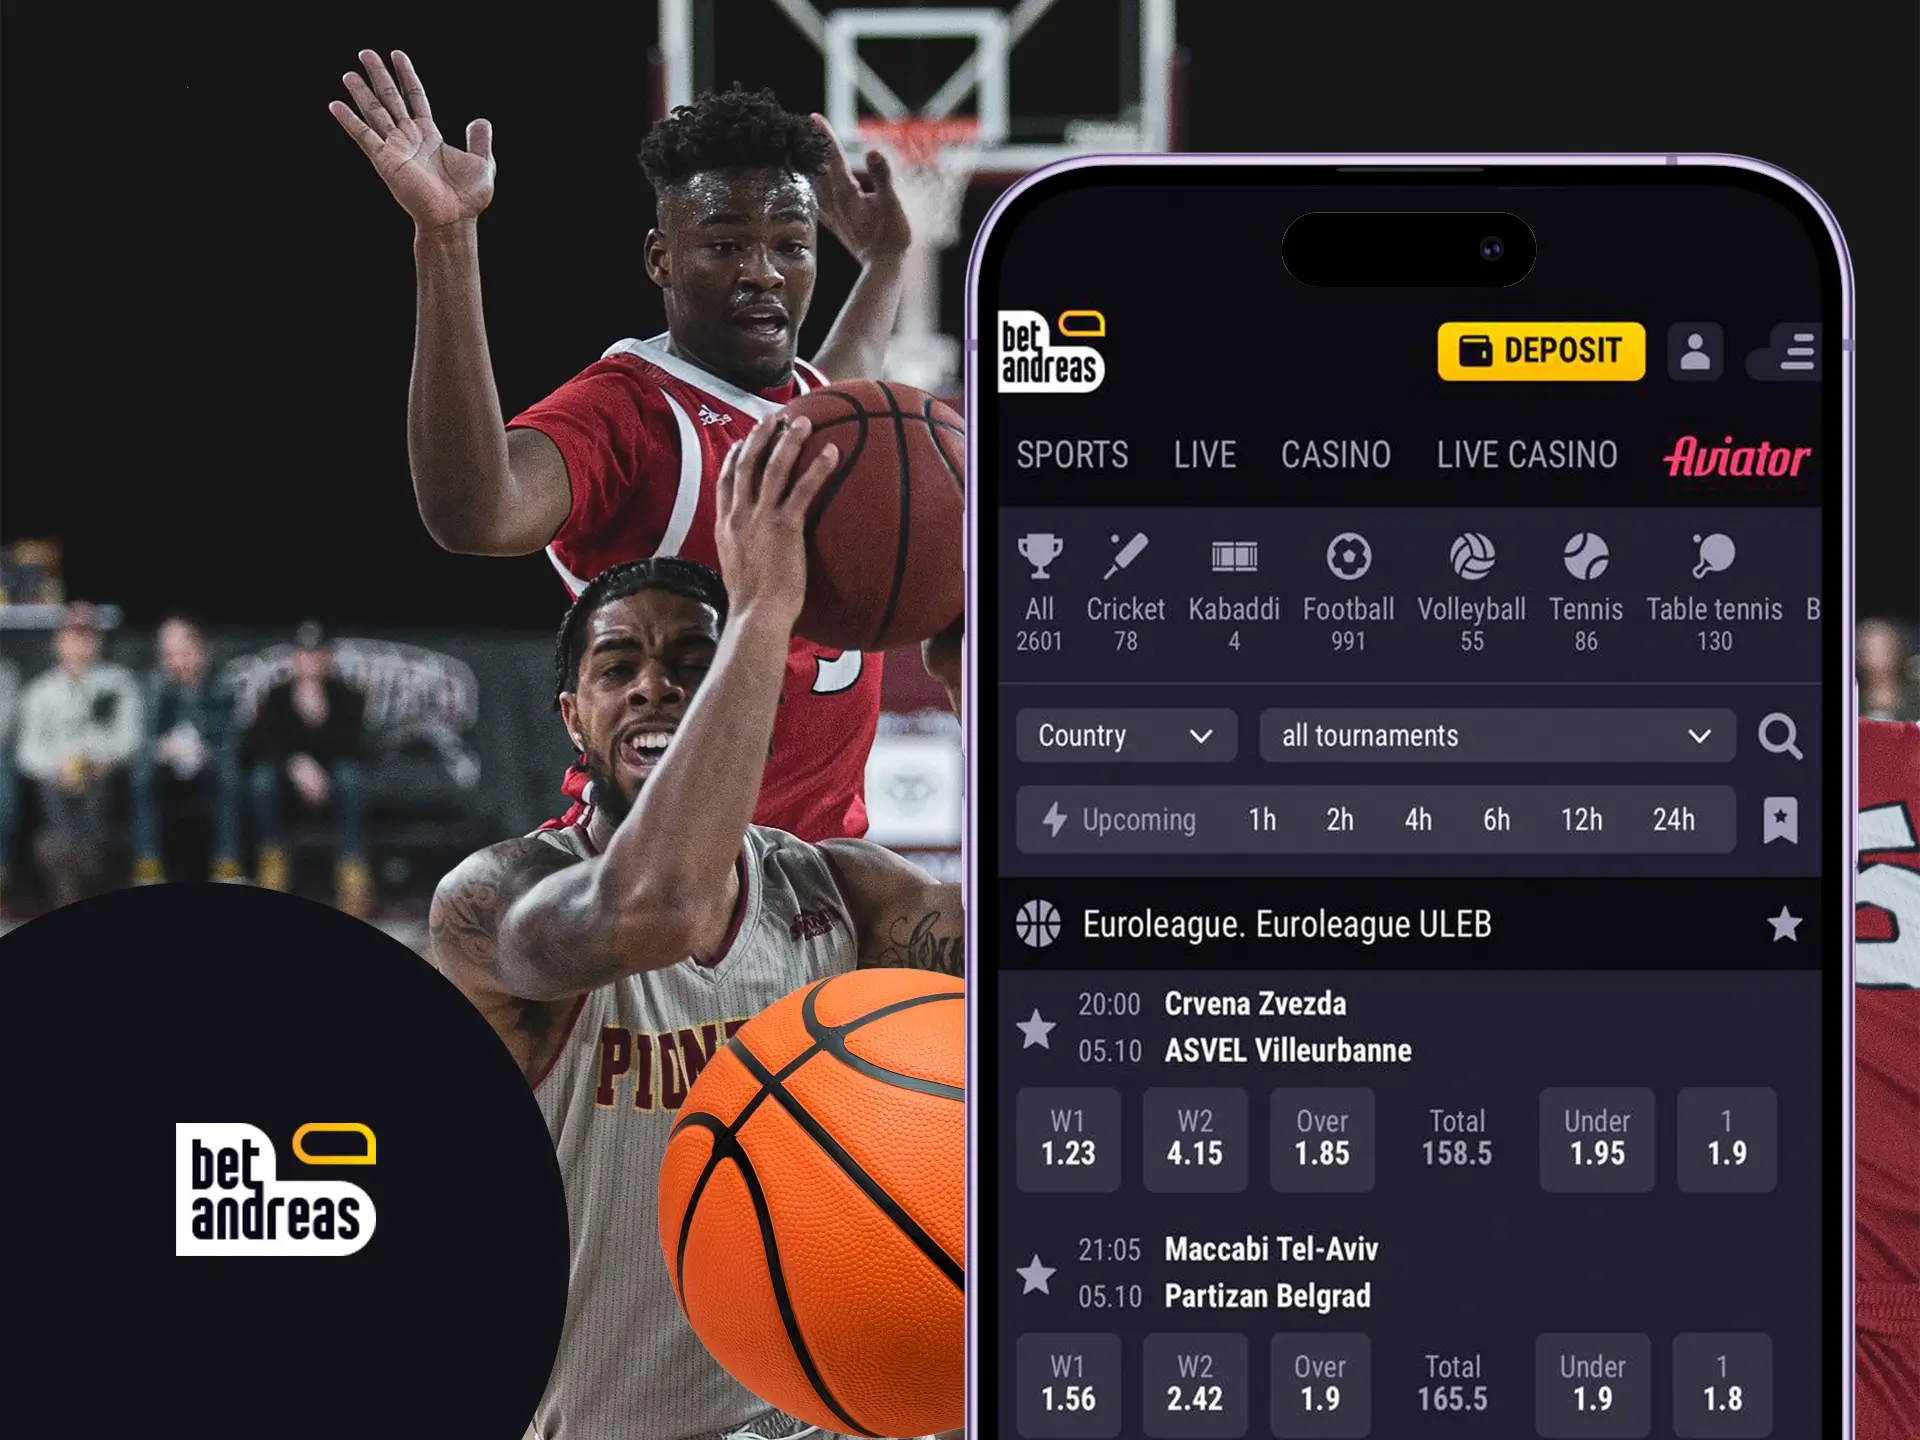 The most famous basketball events are waiting for your bets at BetAndreas.